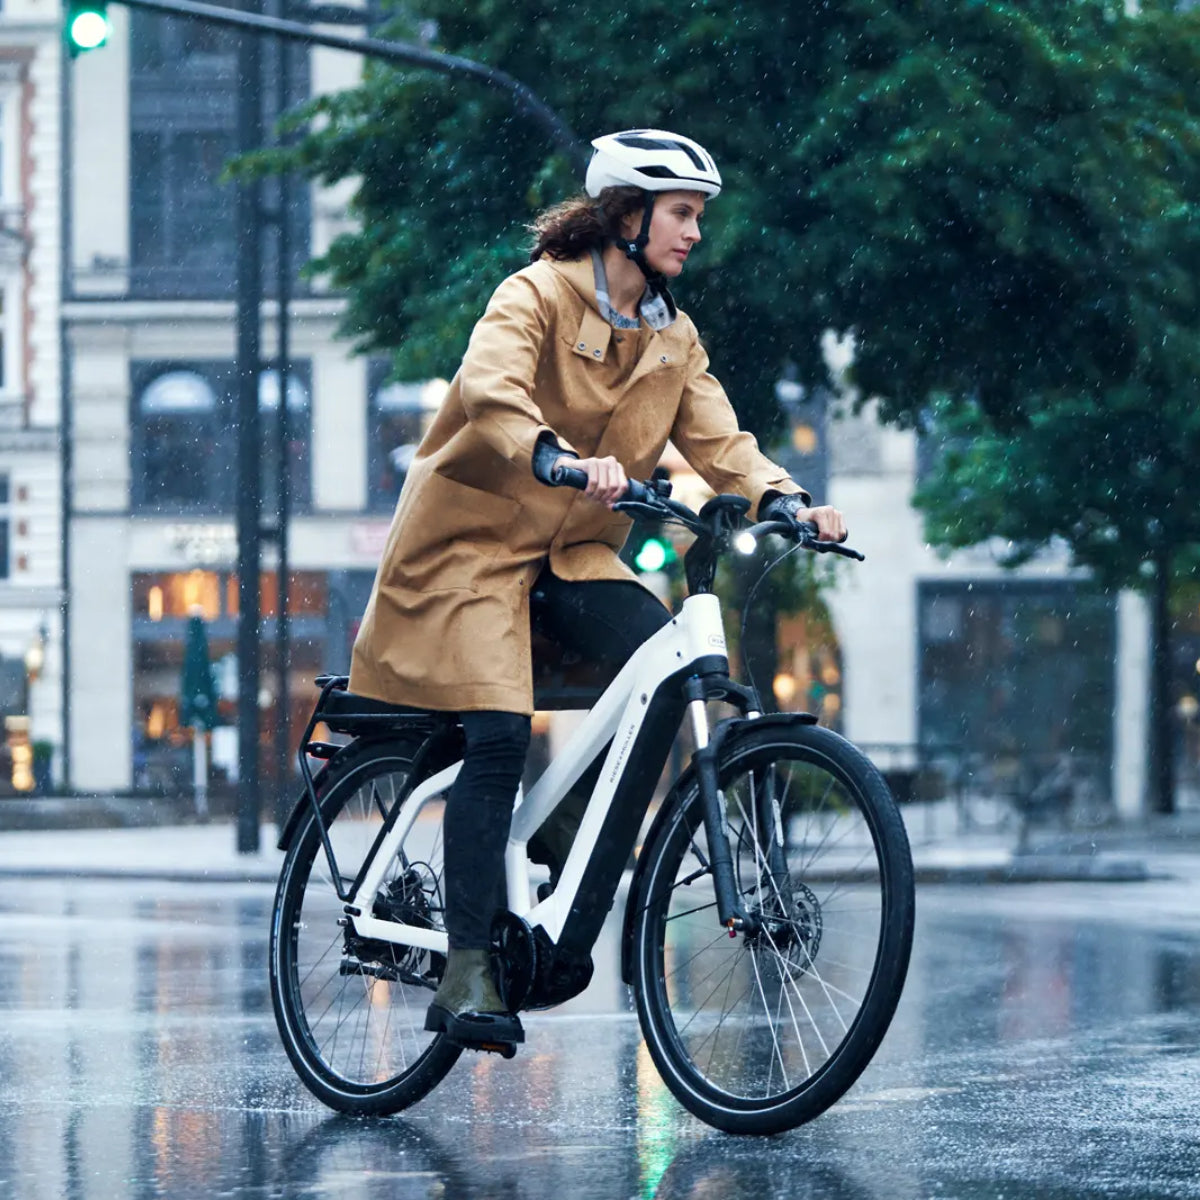 Woman Riding a Riese & Müller Pedal-Assist Electric Bike